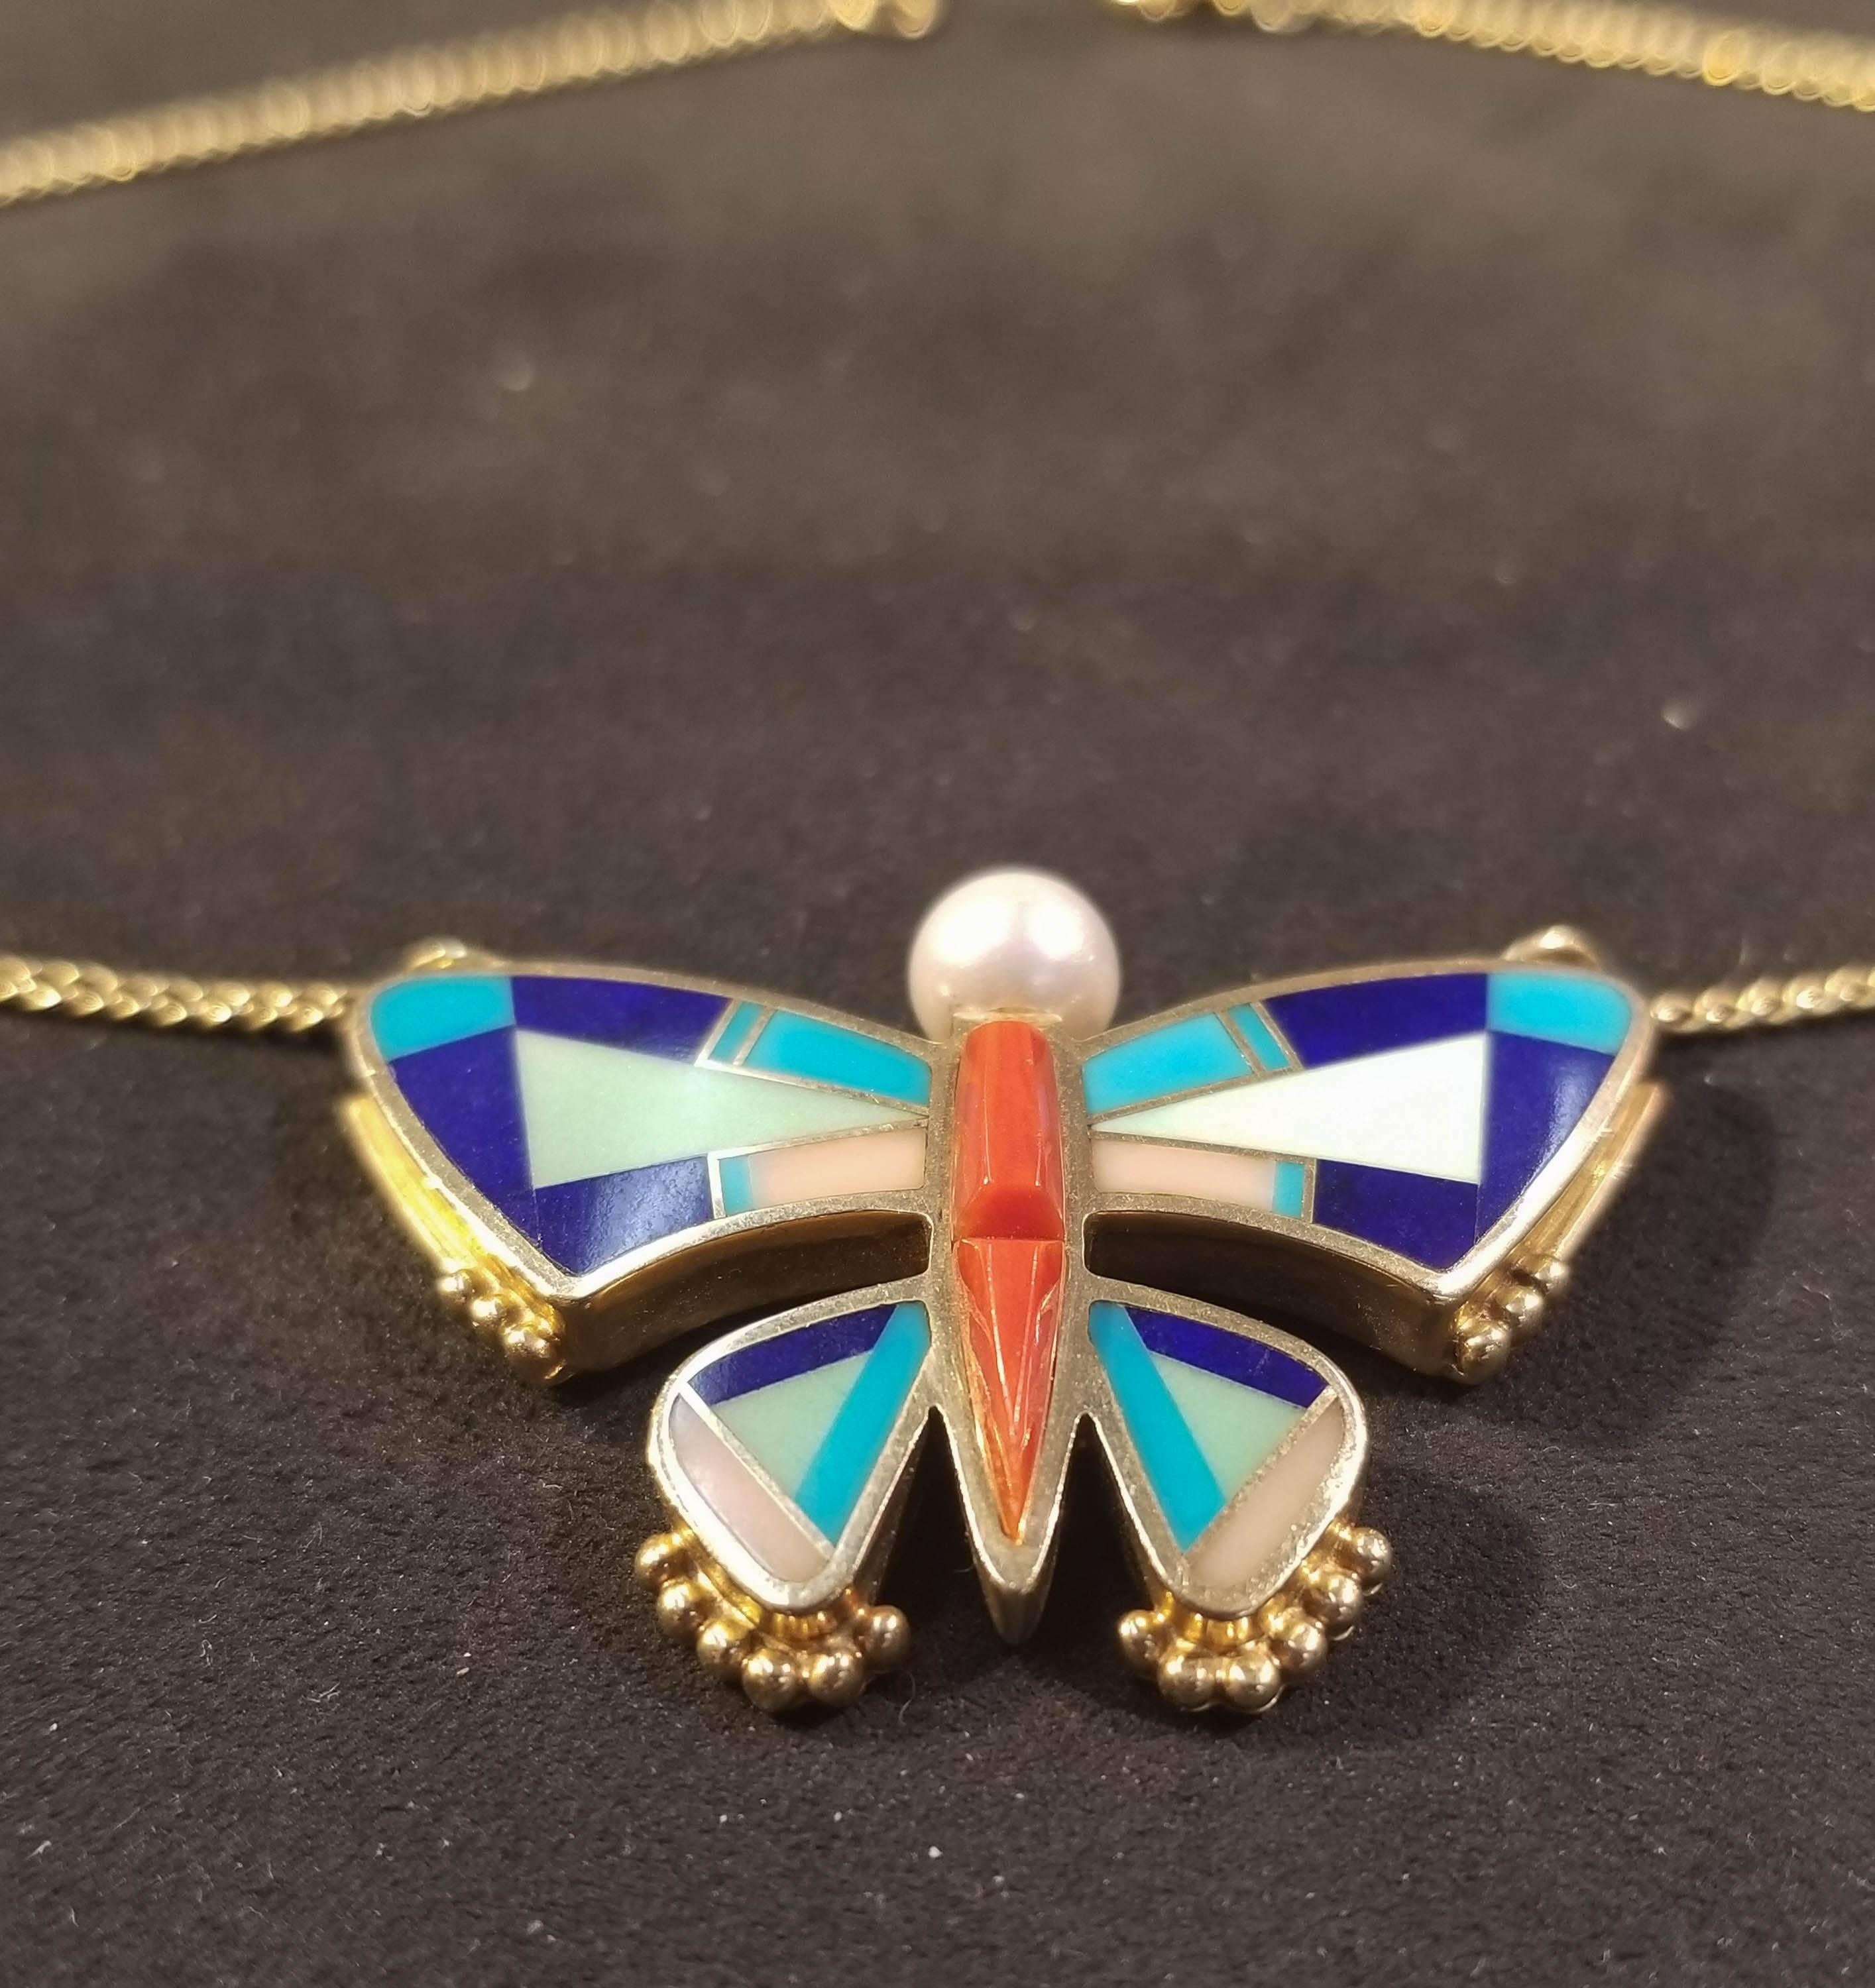 Ray Tracey Multi-Stone Inlay Butterfly Necklace, 14k y/g.
Chain is 14kt yellow gold.
Inlaid stones are Coral, Lapis, Turquoise, Pink Coral and Topped with a Cultured Pearl.